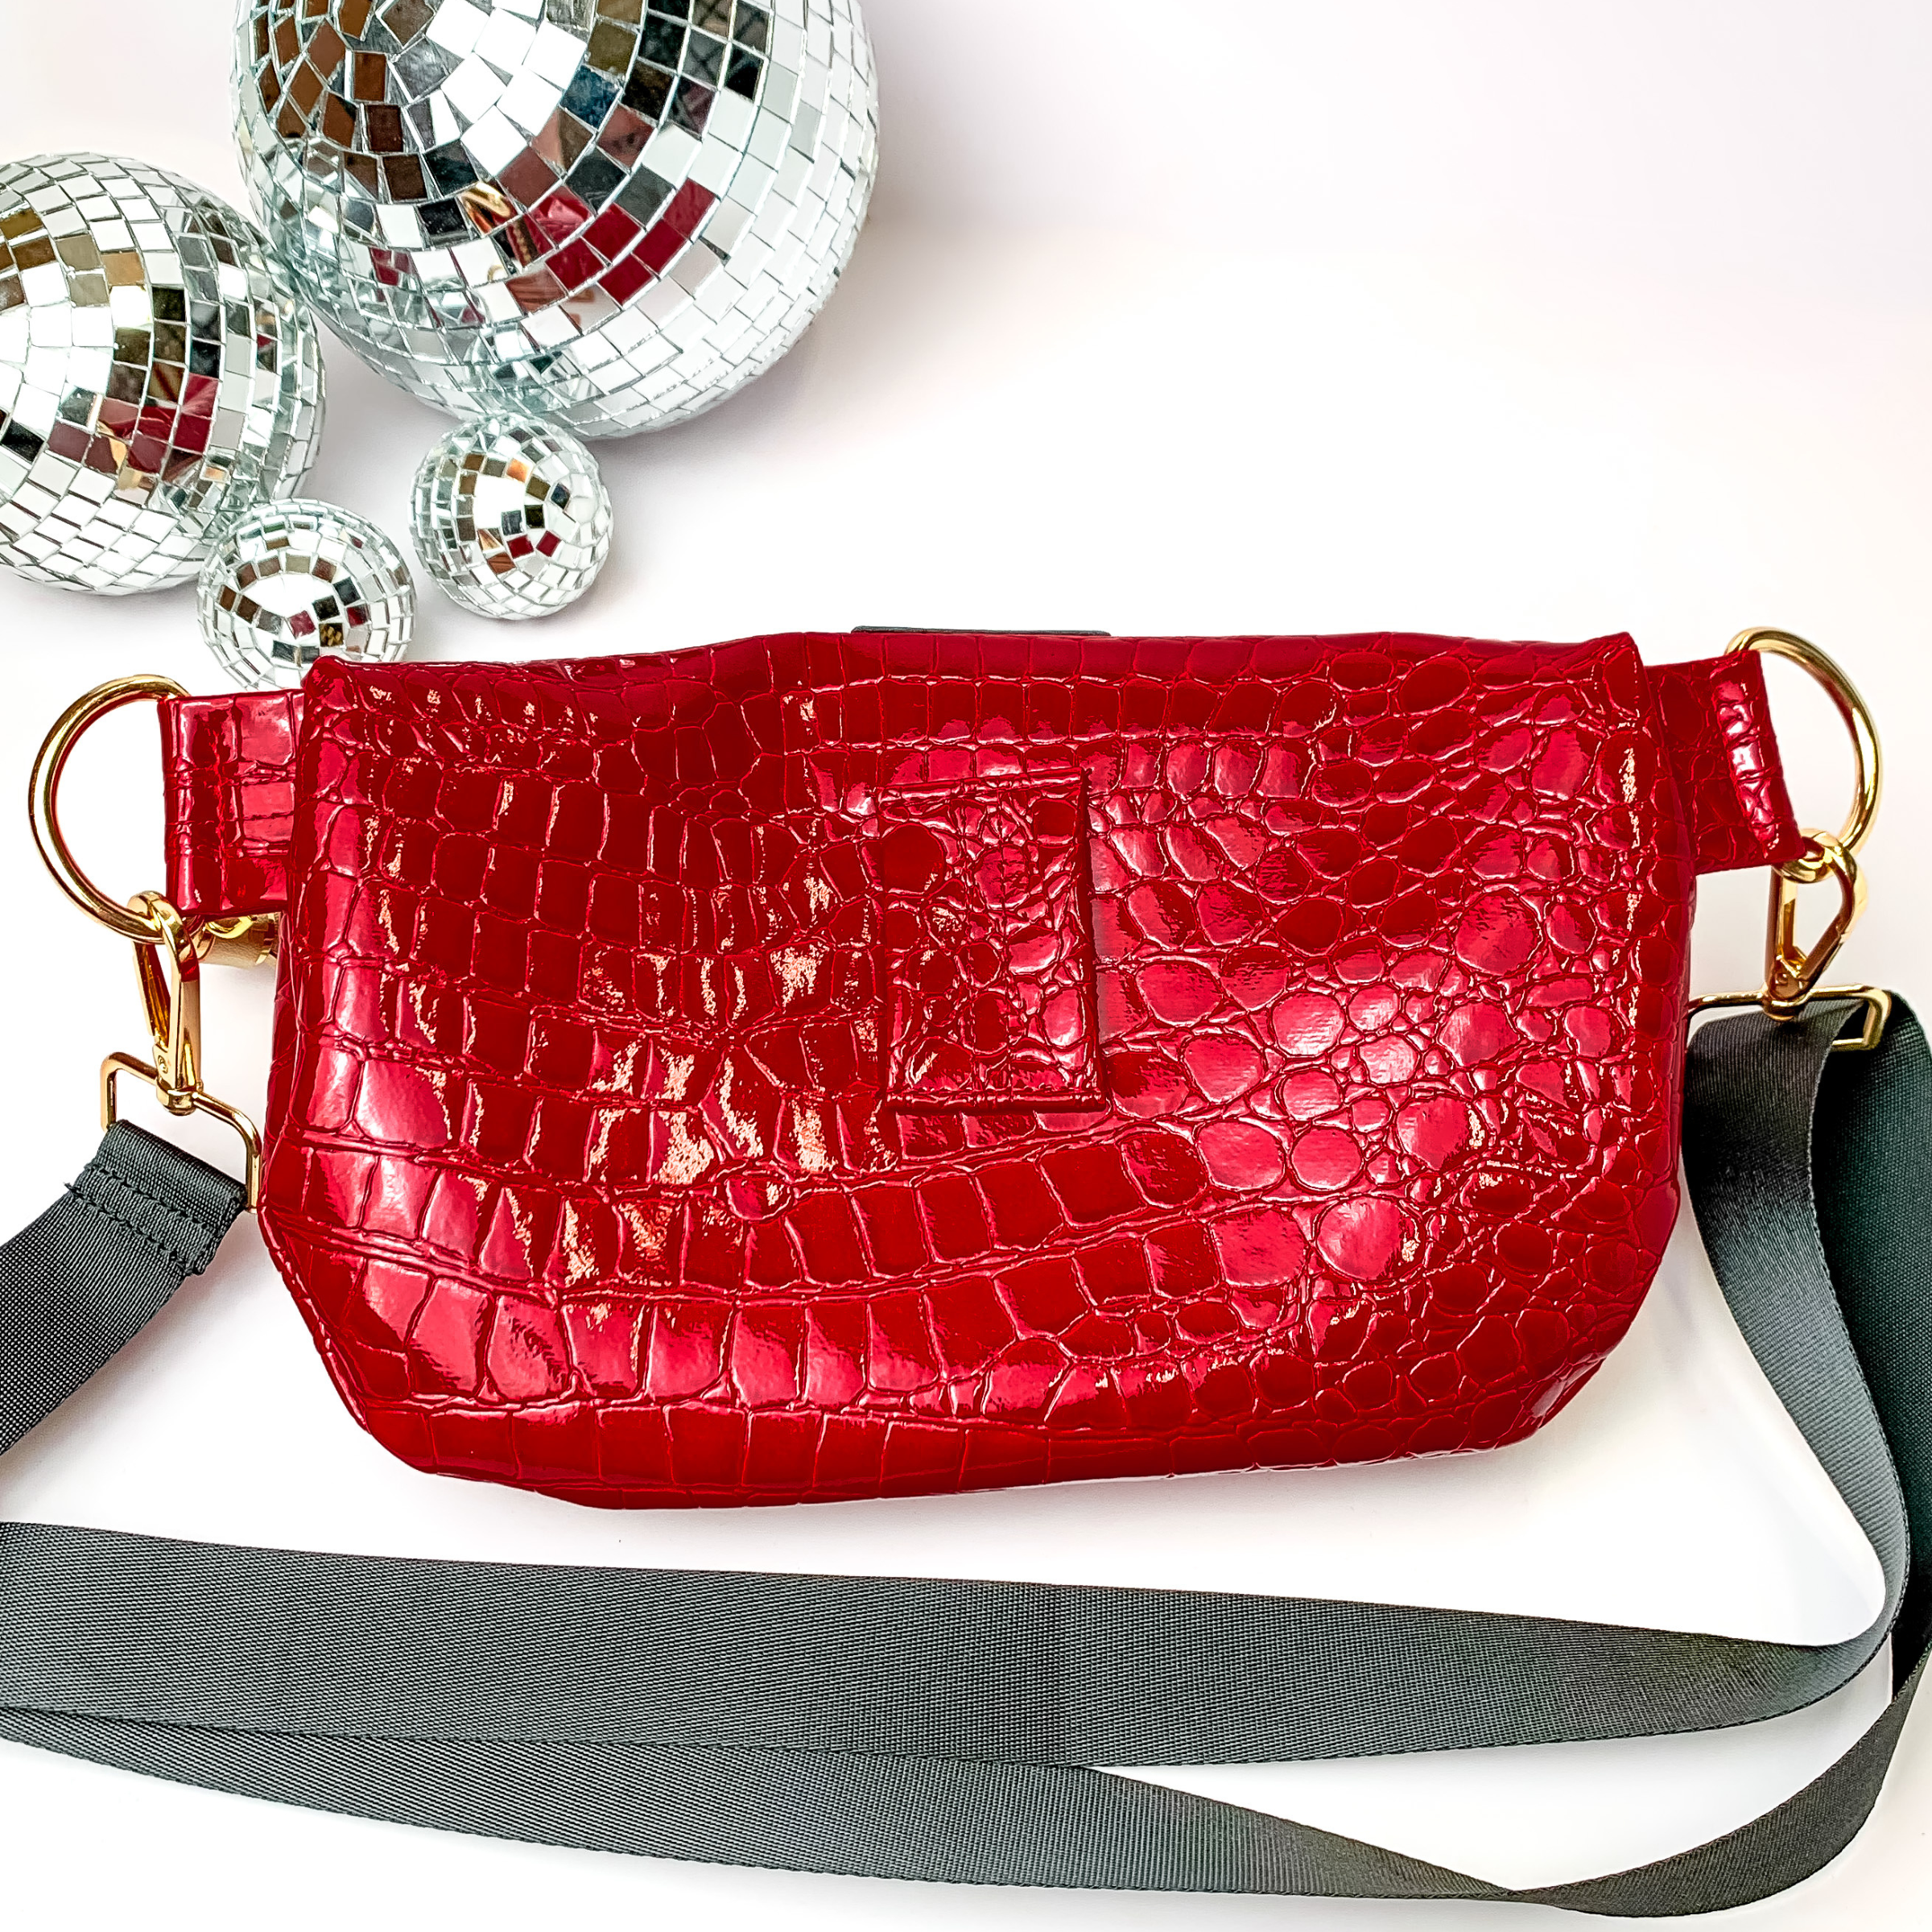 Makeup Junkie | Vixen Sidekick with Adjustable Strap in Cherry Red Croc Print - Giddy Up Glamour Boutique